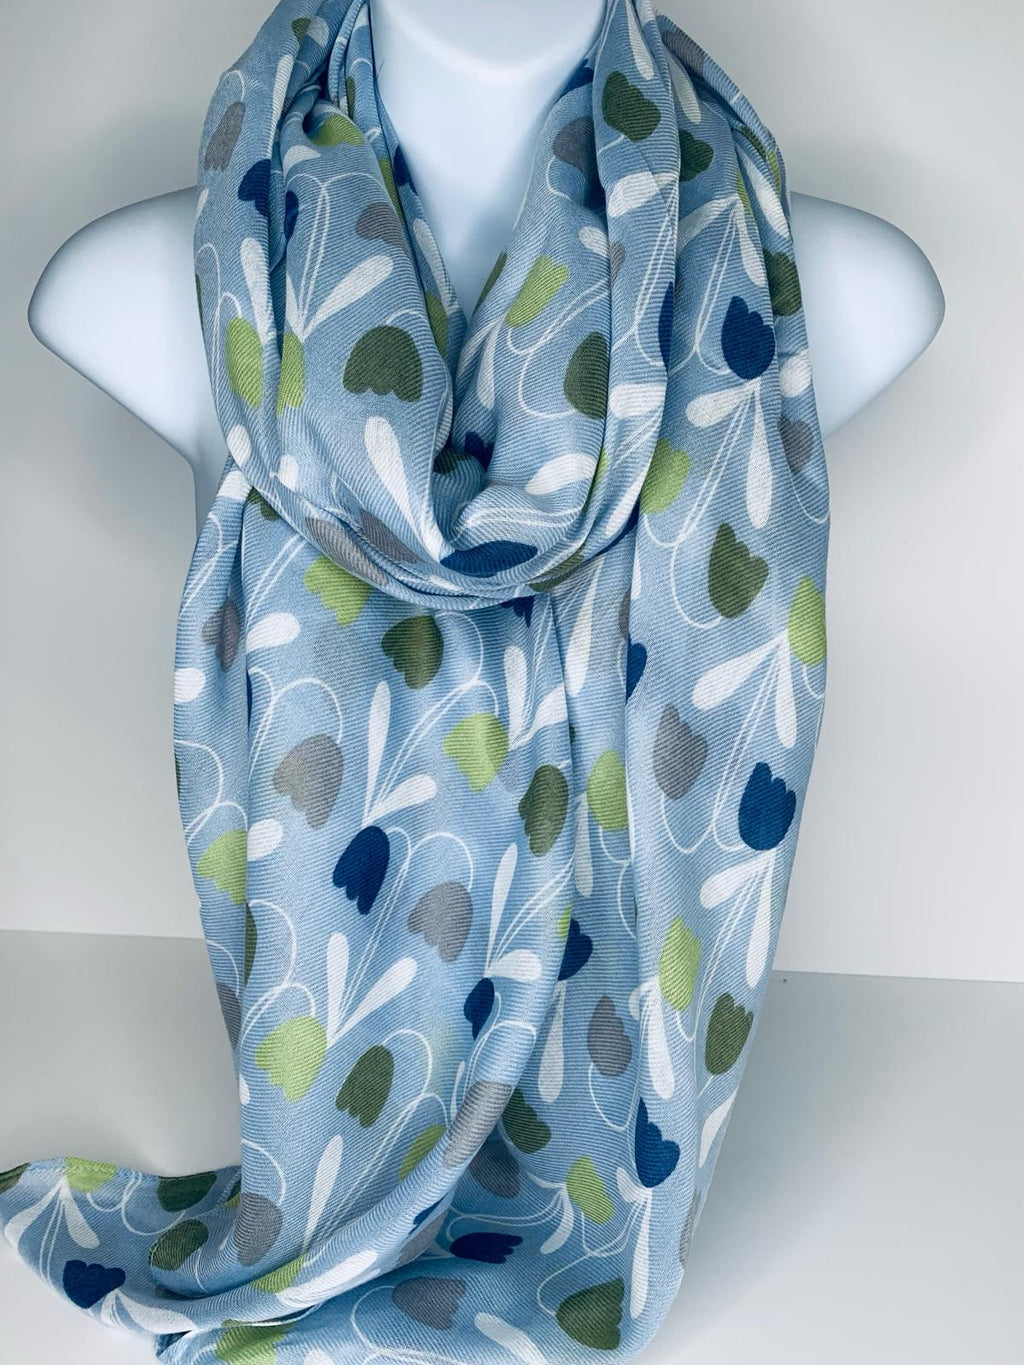 Orla Kiely inspired print scarf in shades of baby blue, green and white